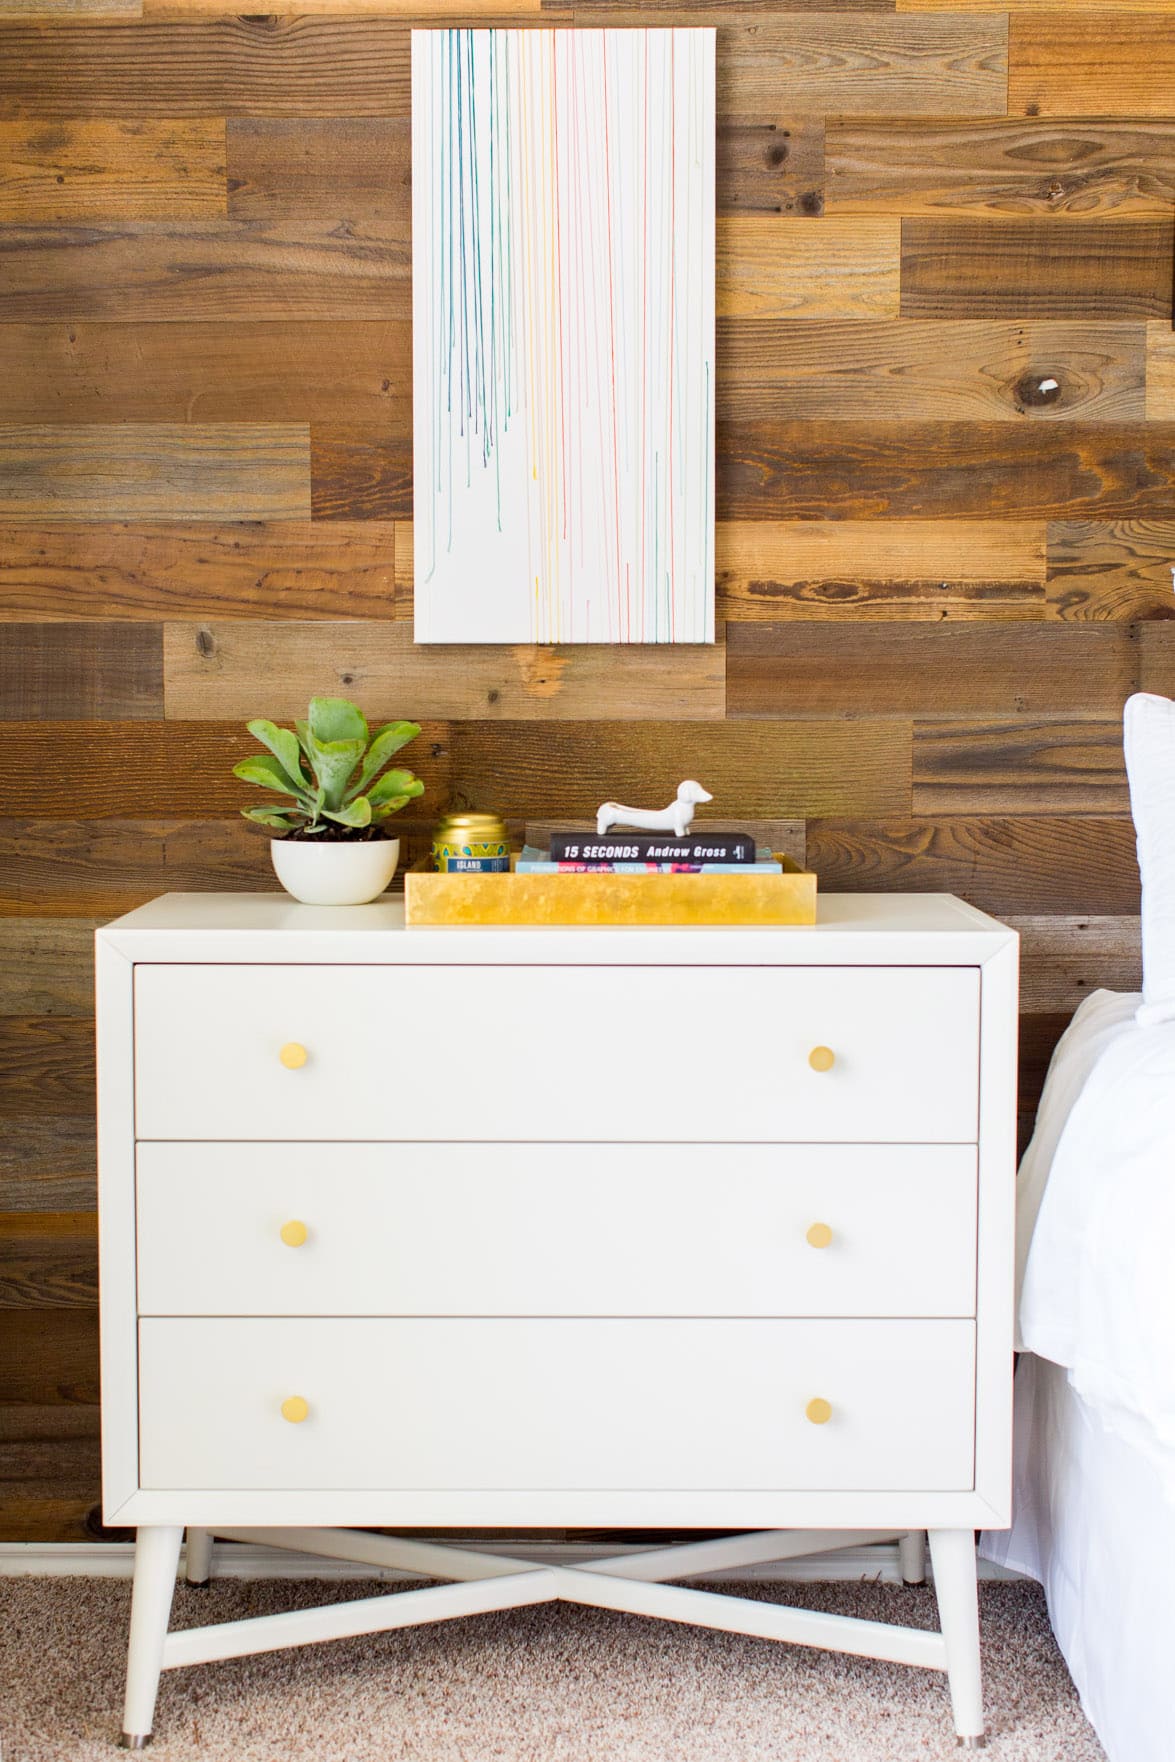 A before and after simple bedroom makeover as a gift to our fam! - sugar and cloth - home decor - best DIY blog - houston - ashley rose